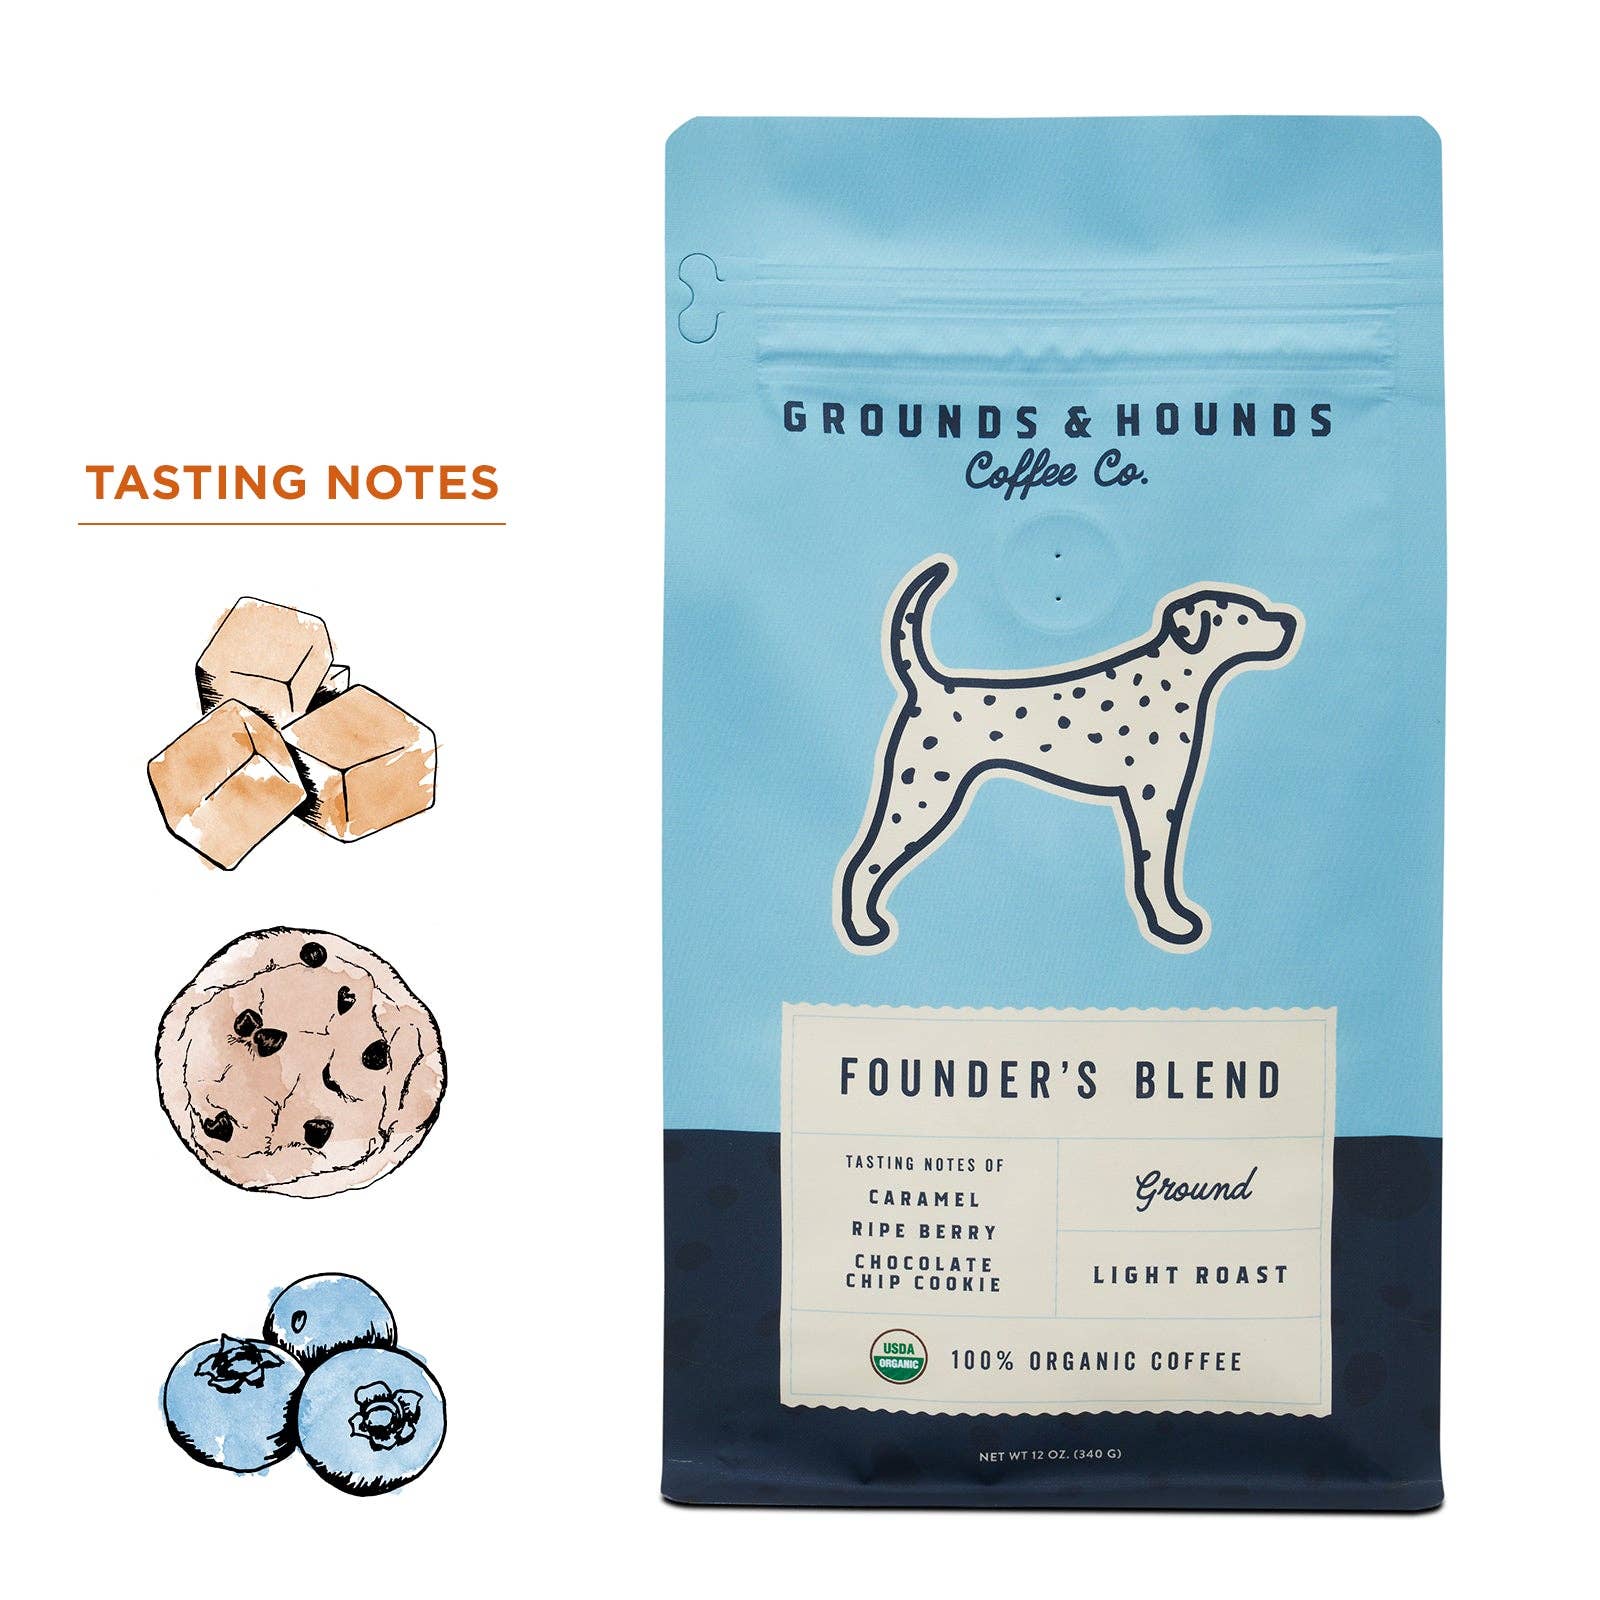 Grounds & Hounds Coffee Co. - Founder's Blend Coffee: Whole Bean